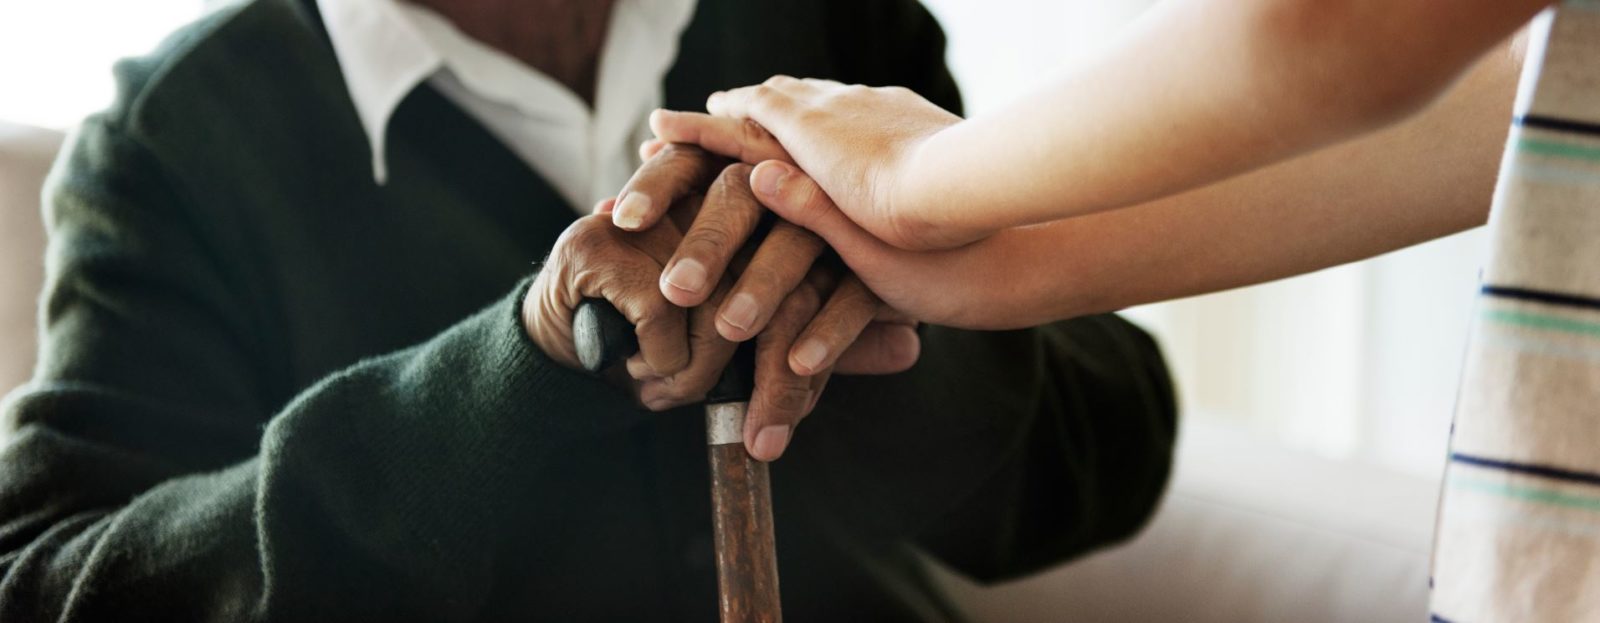 African American male's hands on a cane with smaller hands of a caregiver, providing reassurance